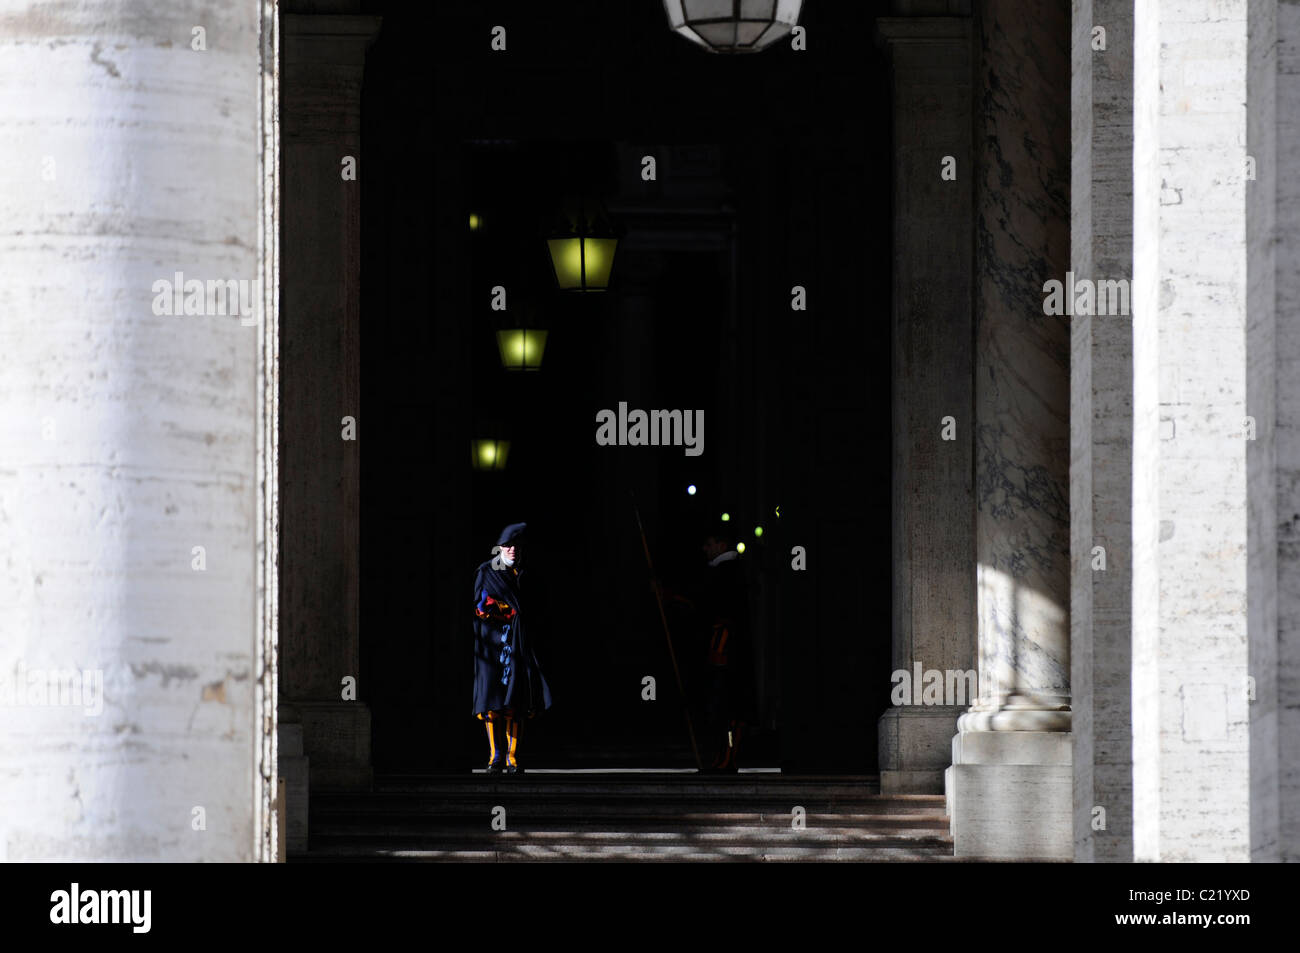 Pontifical Swiss Guard in The Apostolic Palace in Vatican City, Rome Italy. Stock Photo